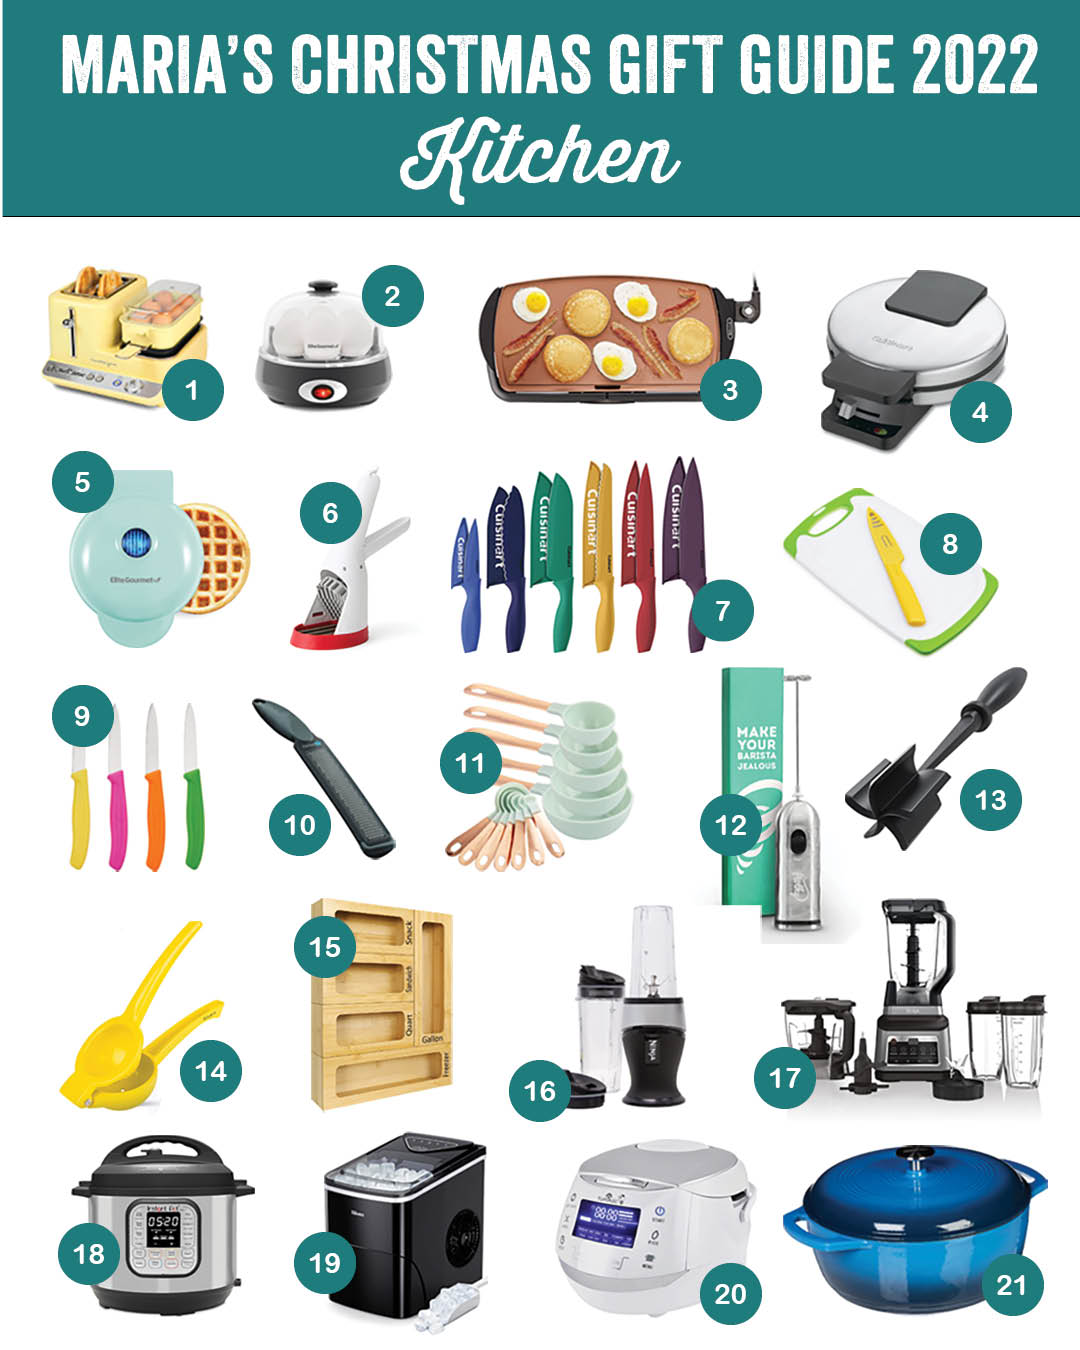 Best Kitchen Gifts & Christmas Gift Ideas 2022